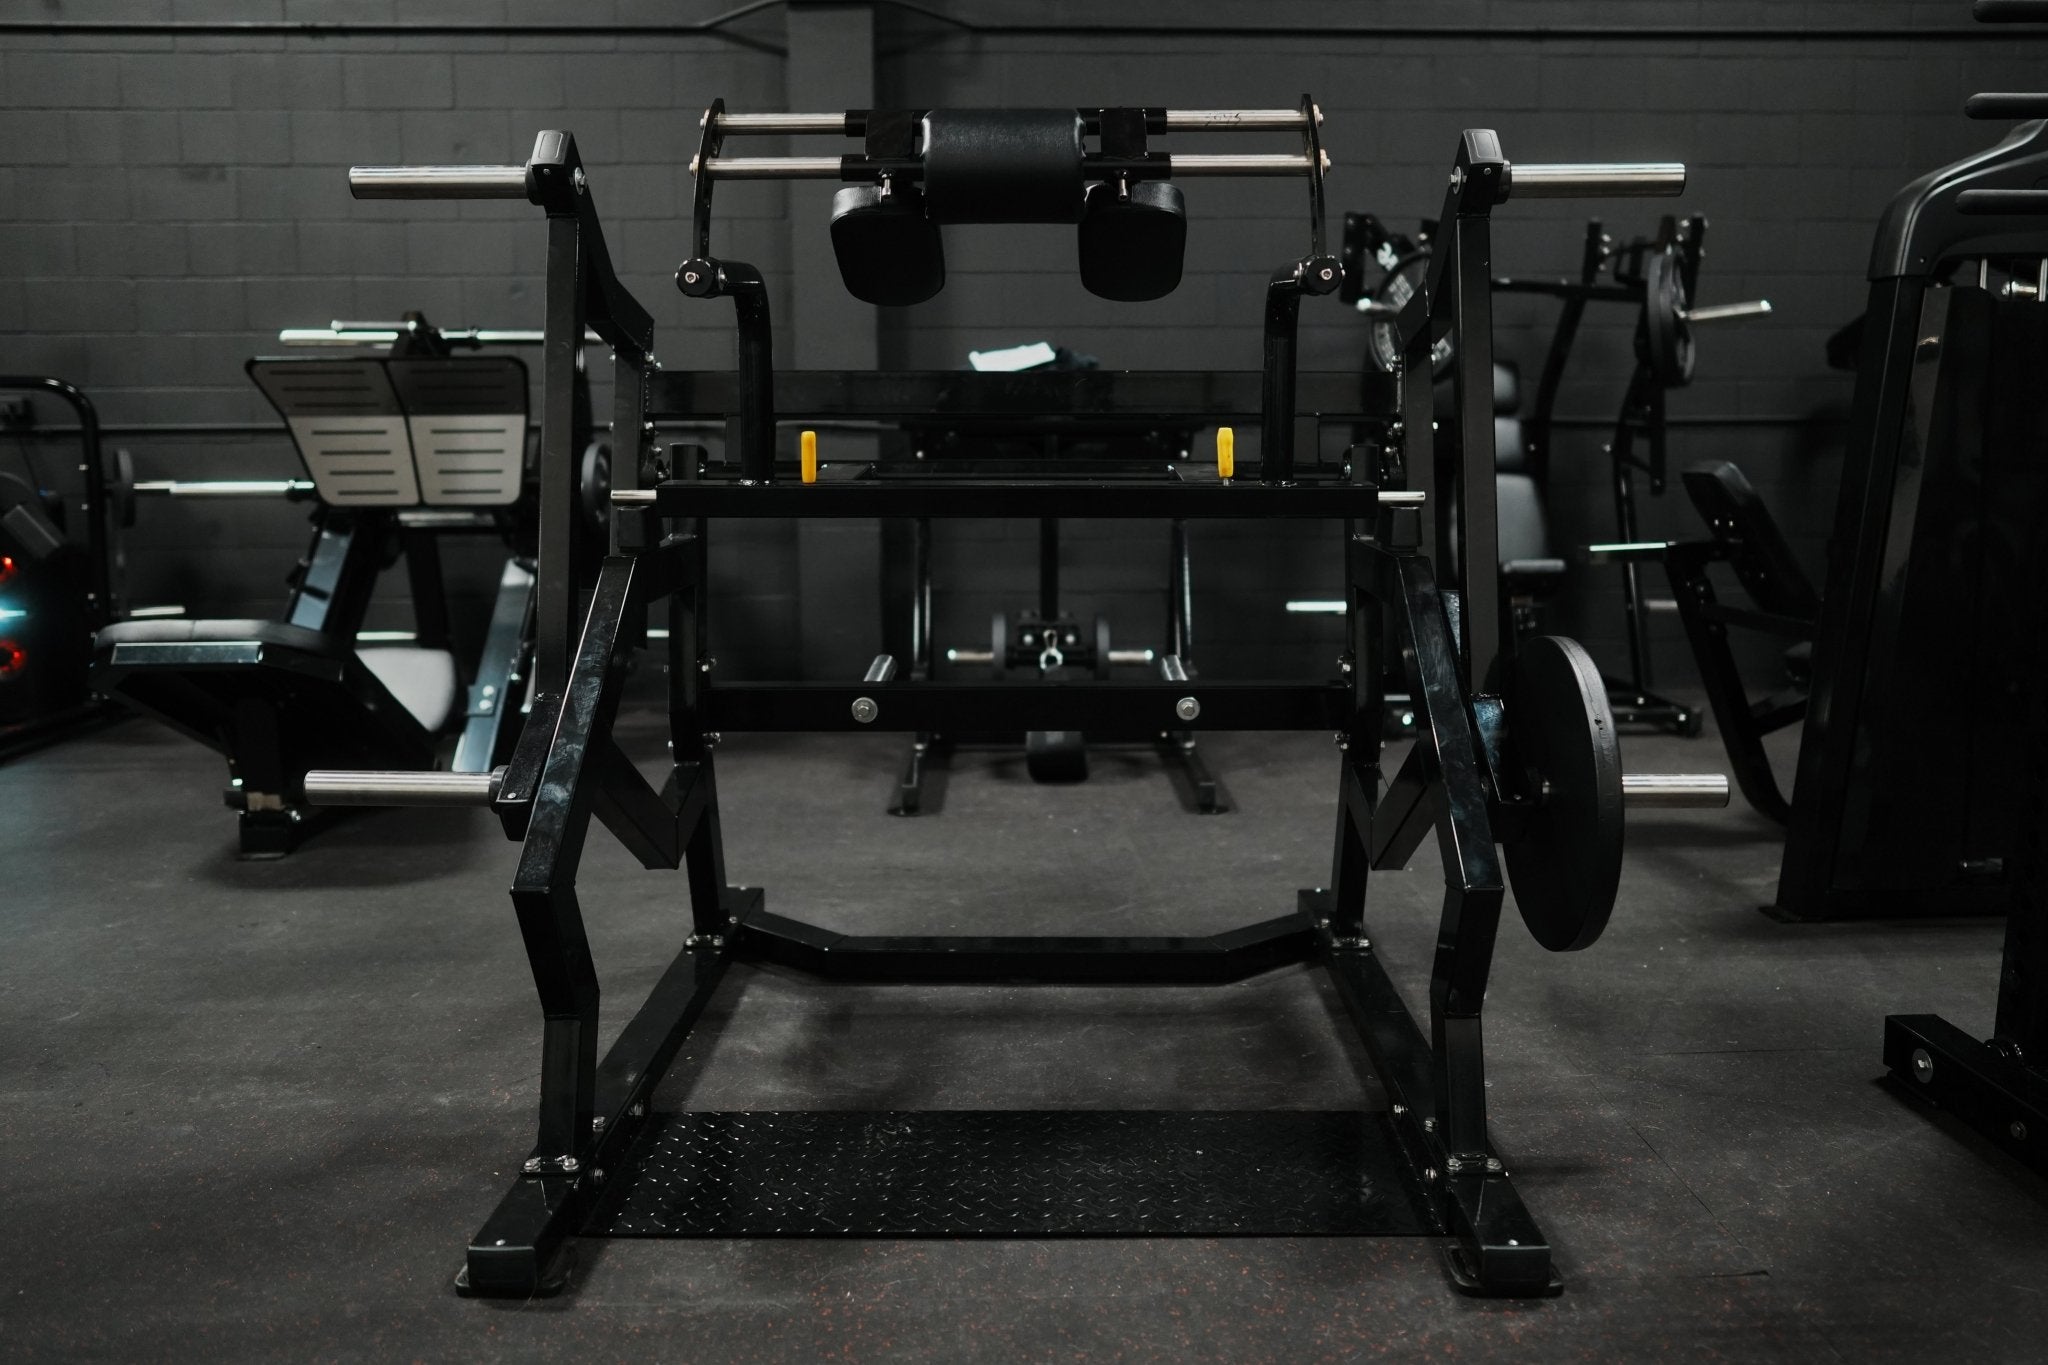 Safety Squat Machine - Recon Health & Fitness